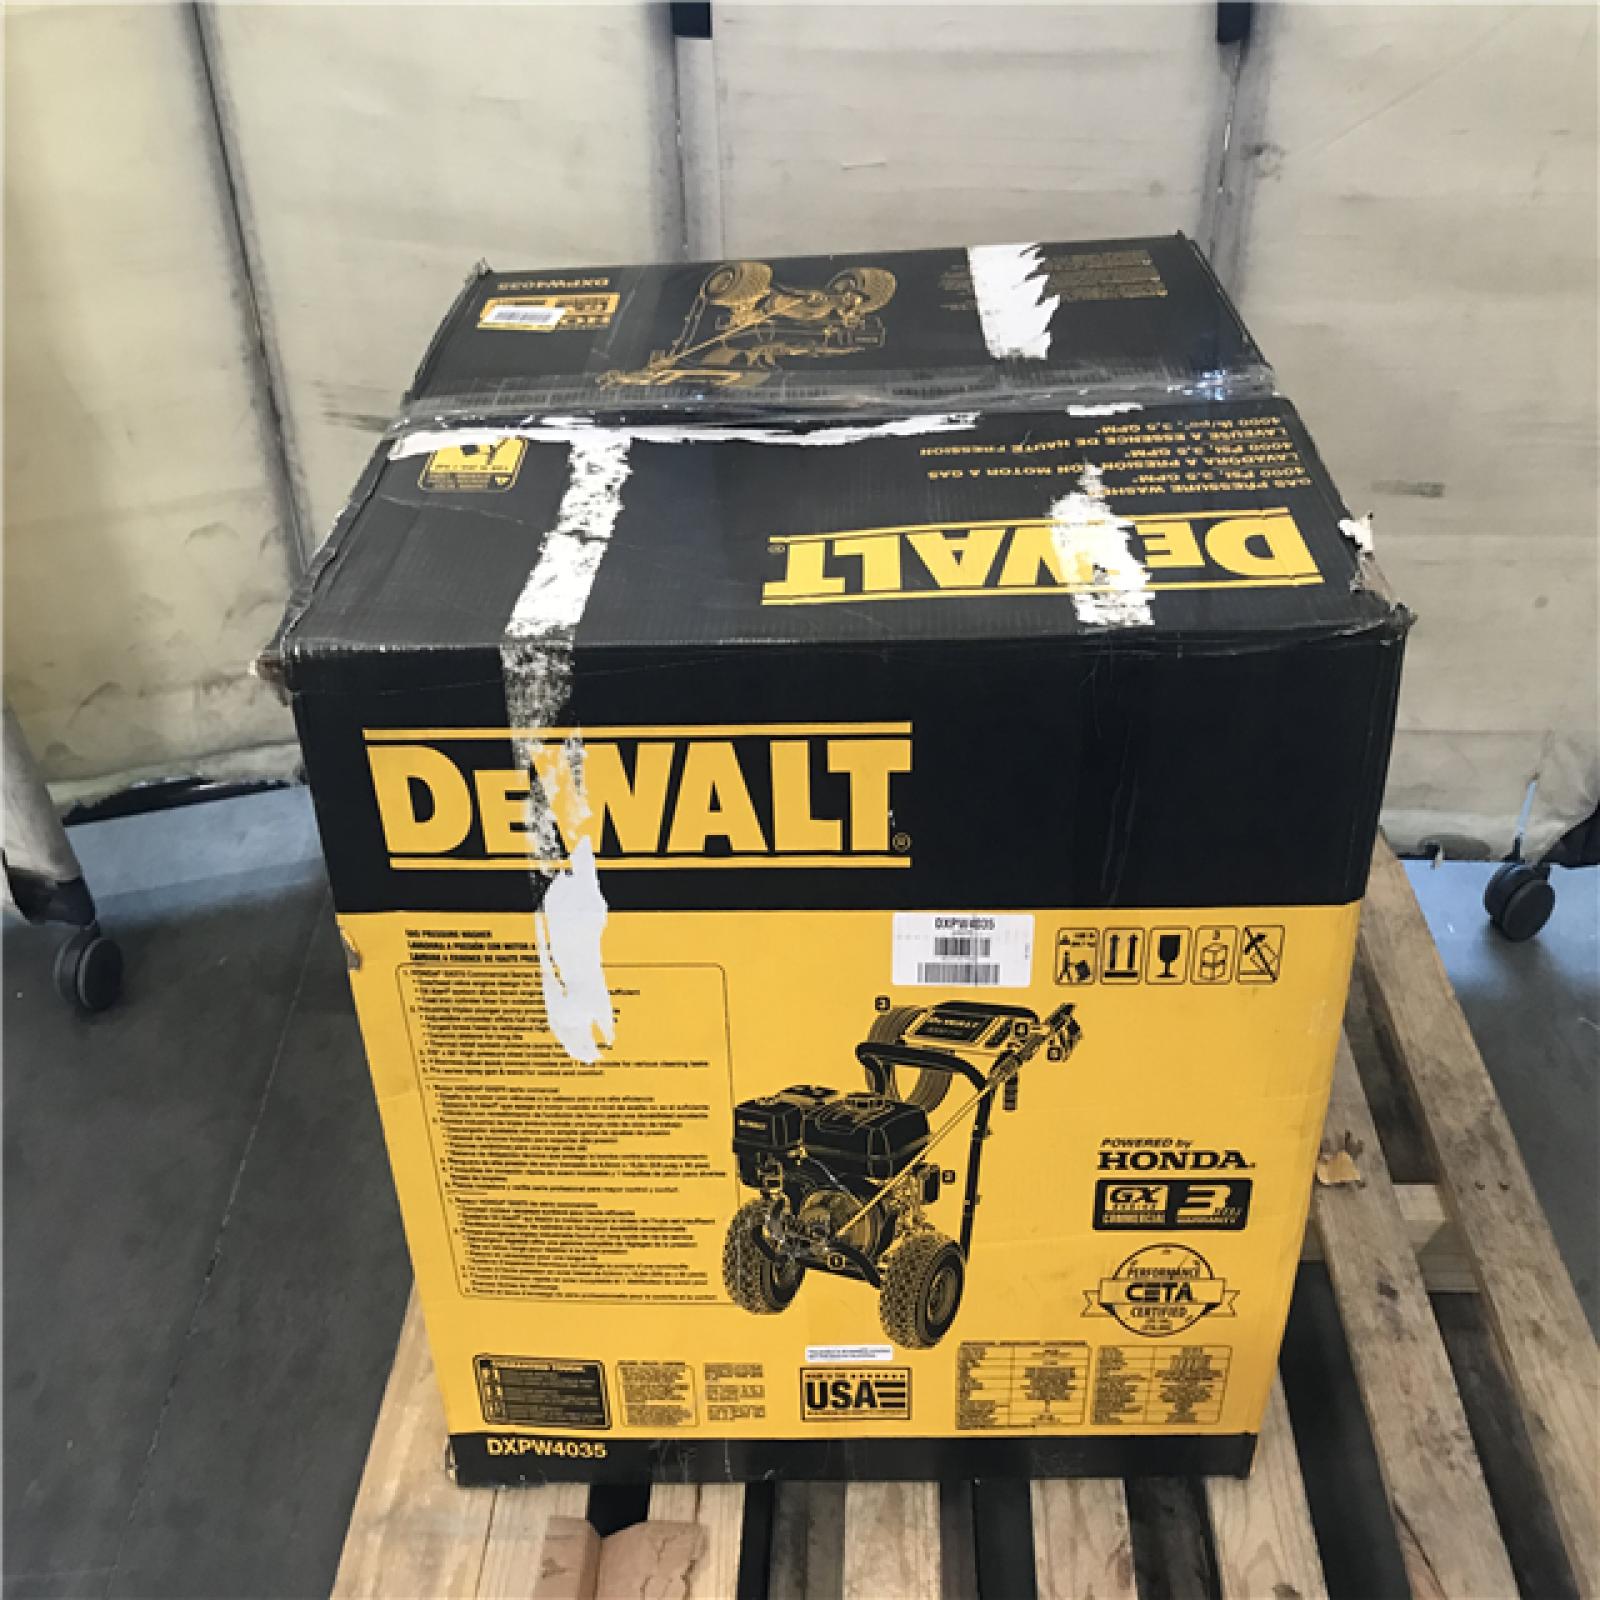 California NEW DEWALT DXPW4035 4000 PSI at 3.5 GPM HONDA Cold Water Professional Gas Pressure Washer